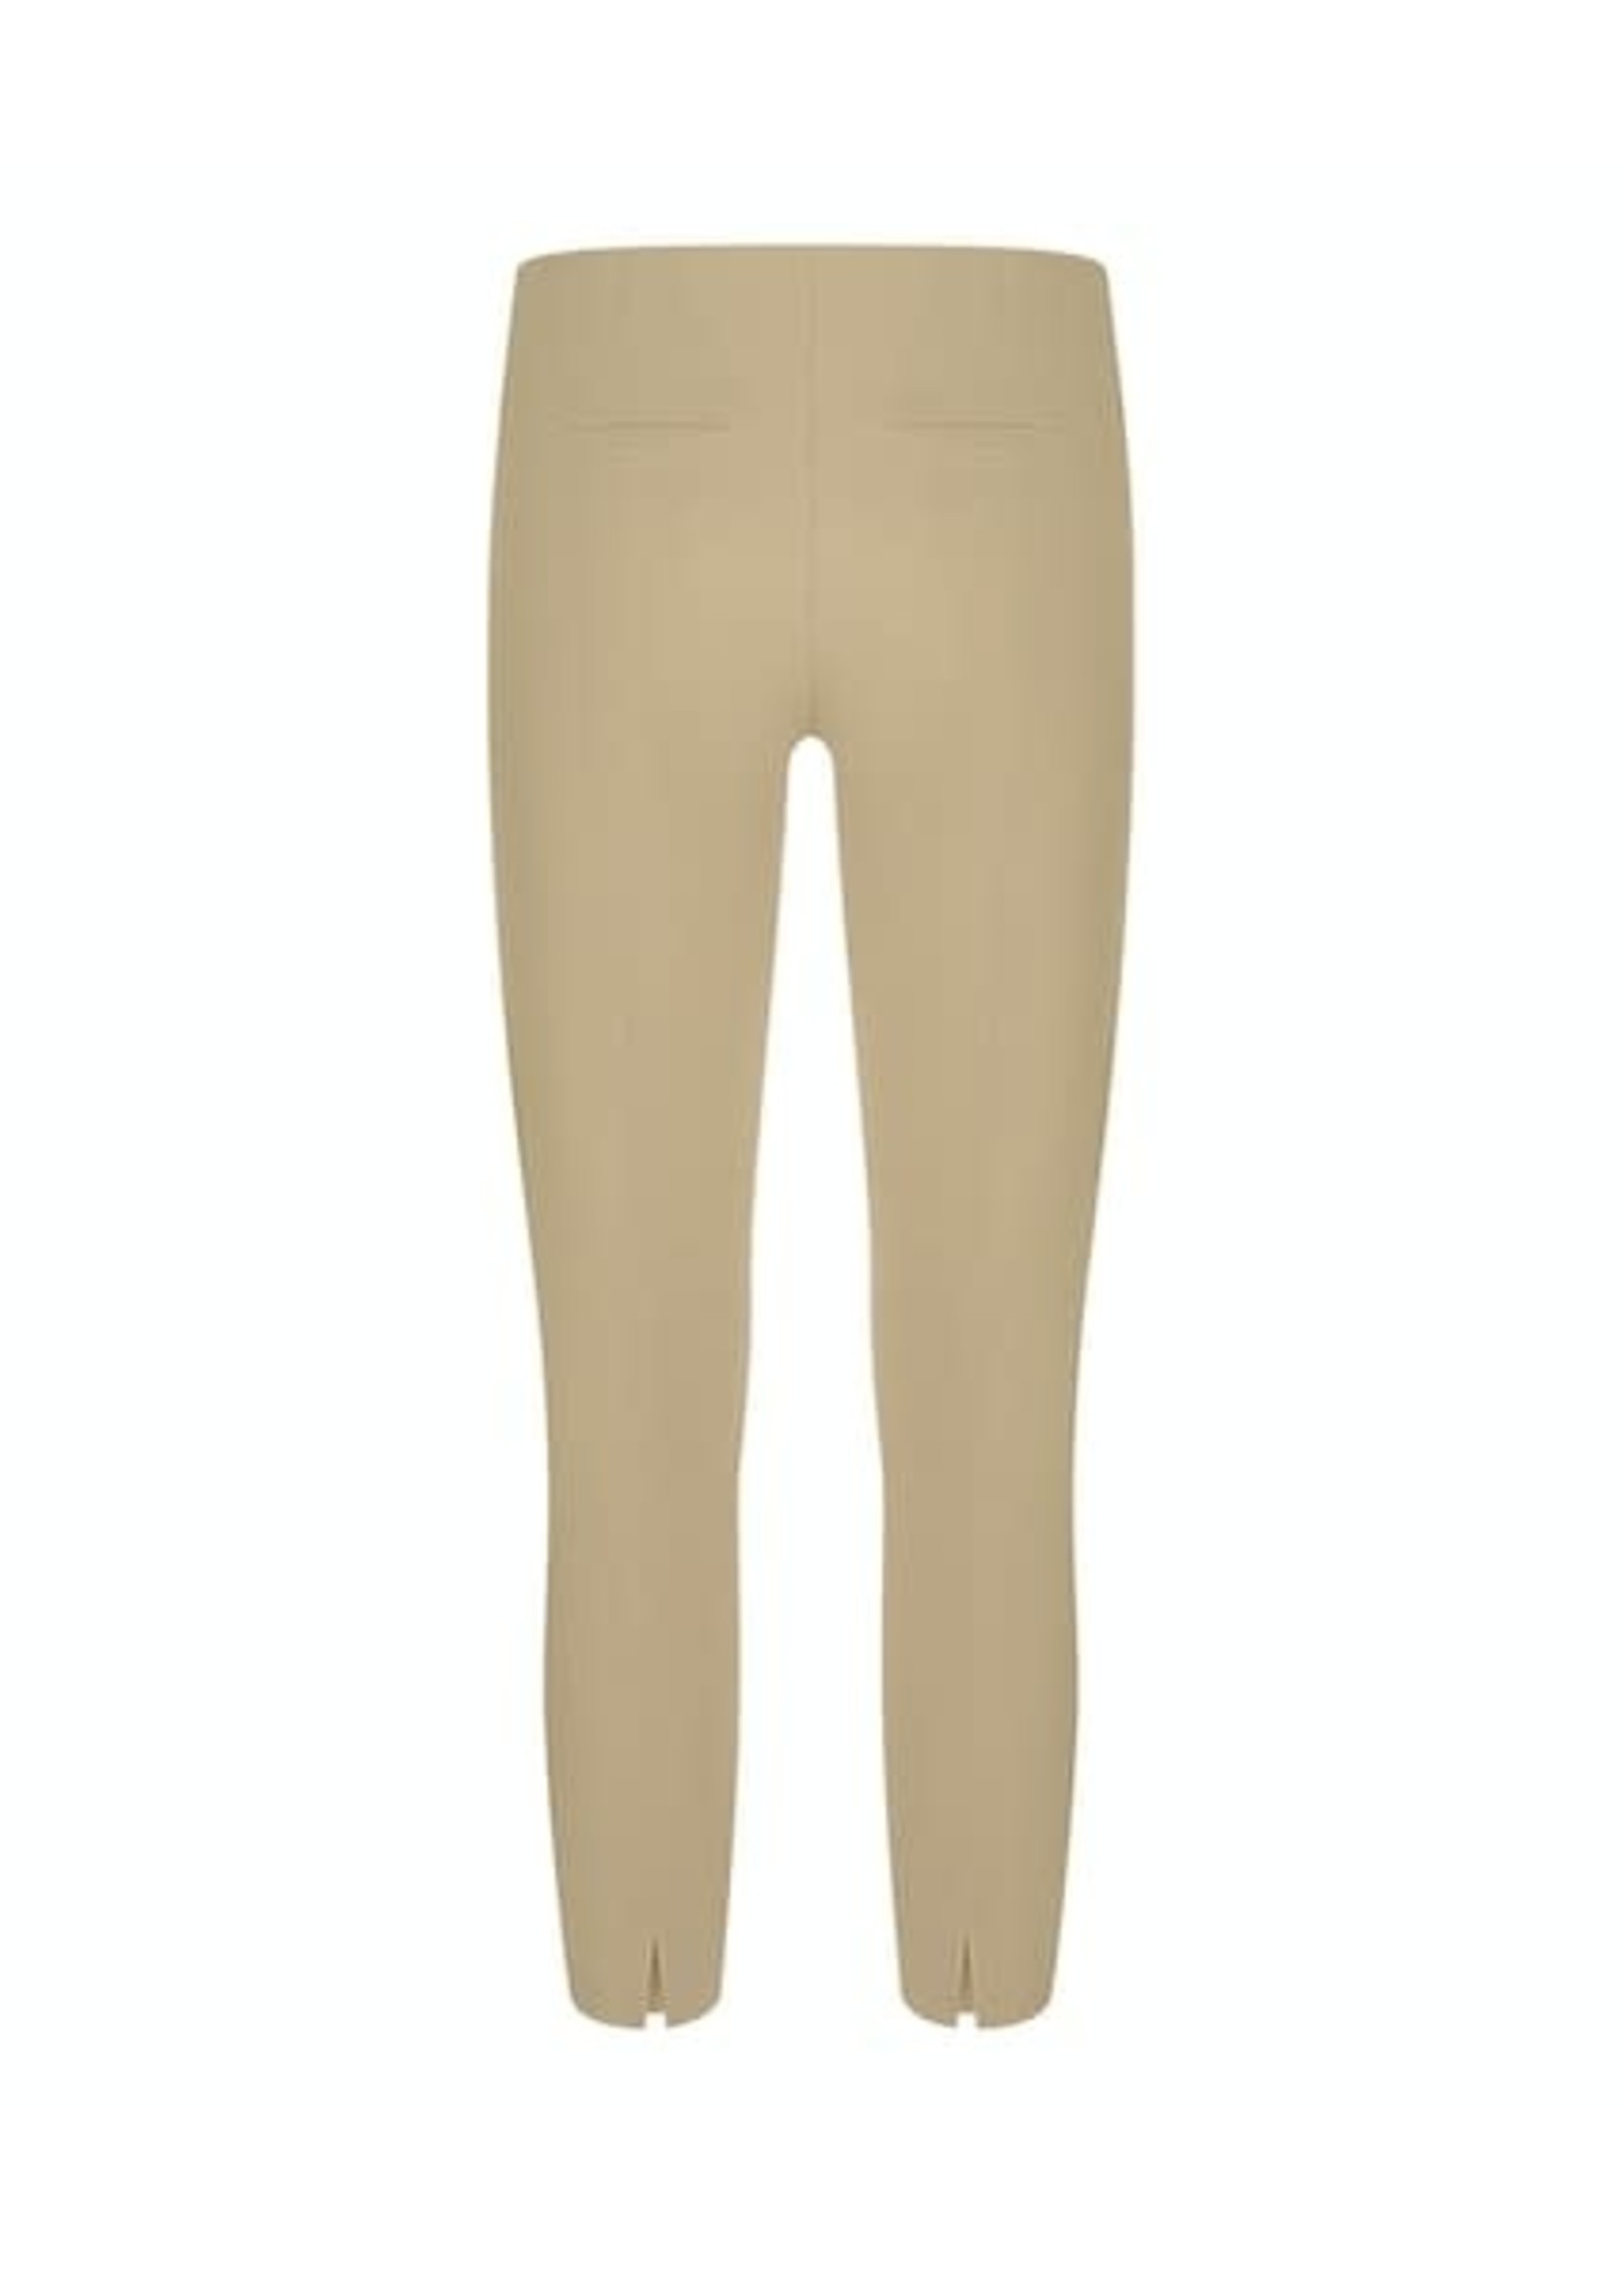 Cambio Cambio, Ros summer cropped ladies pants long, Sand Shell